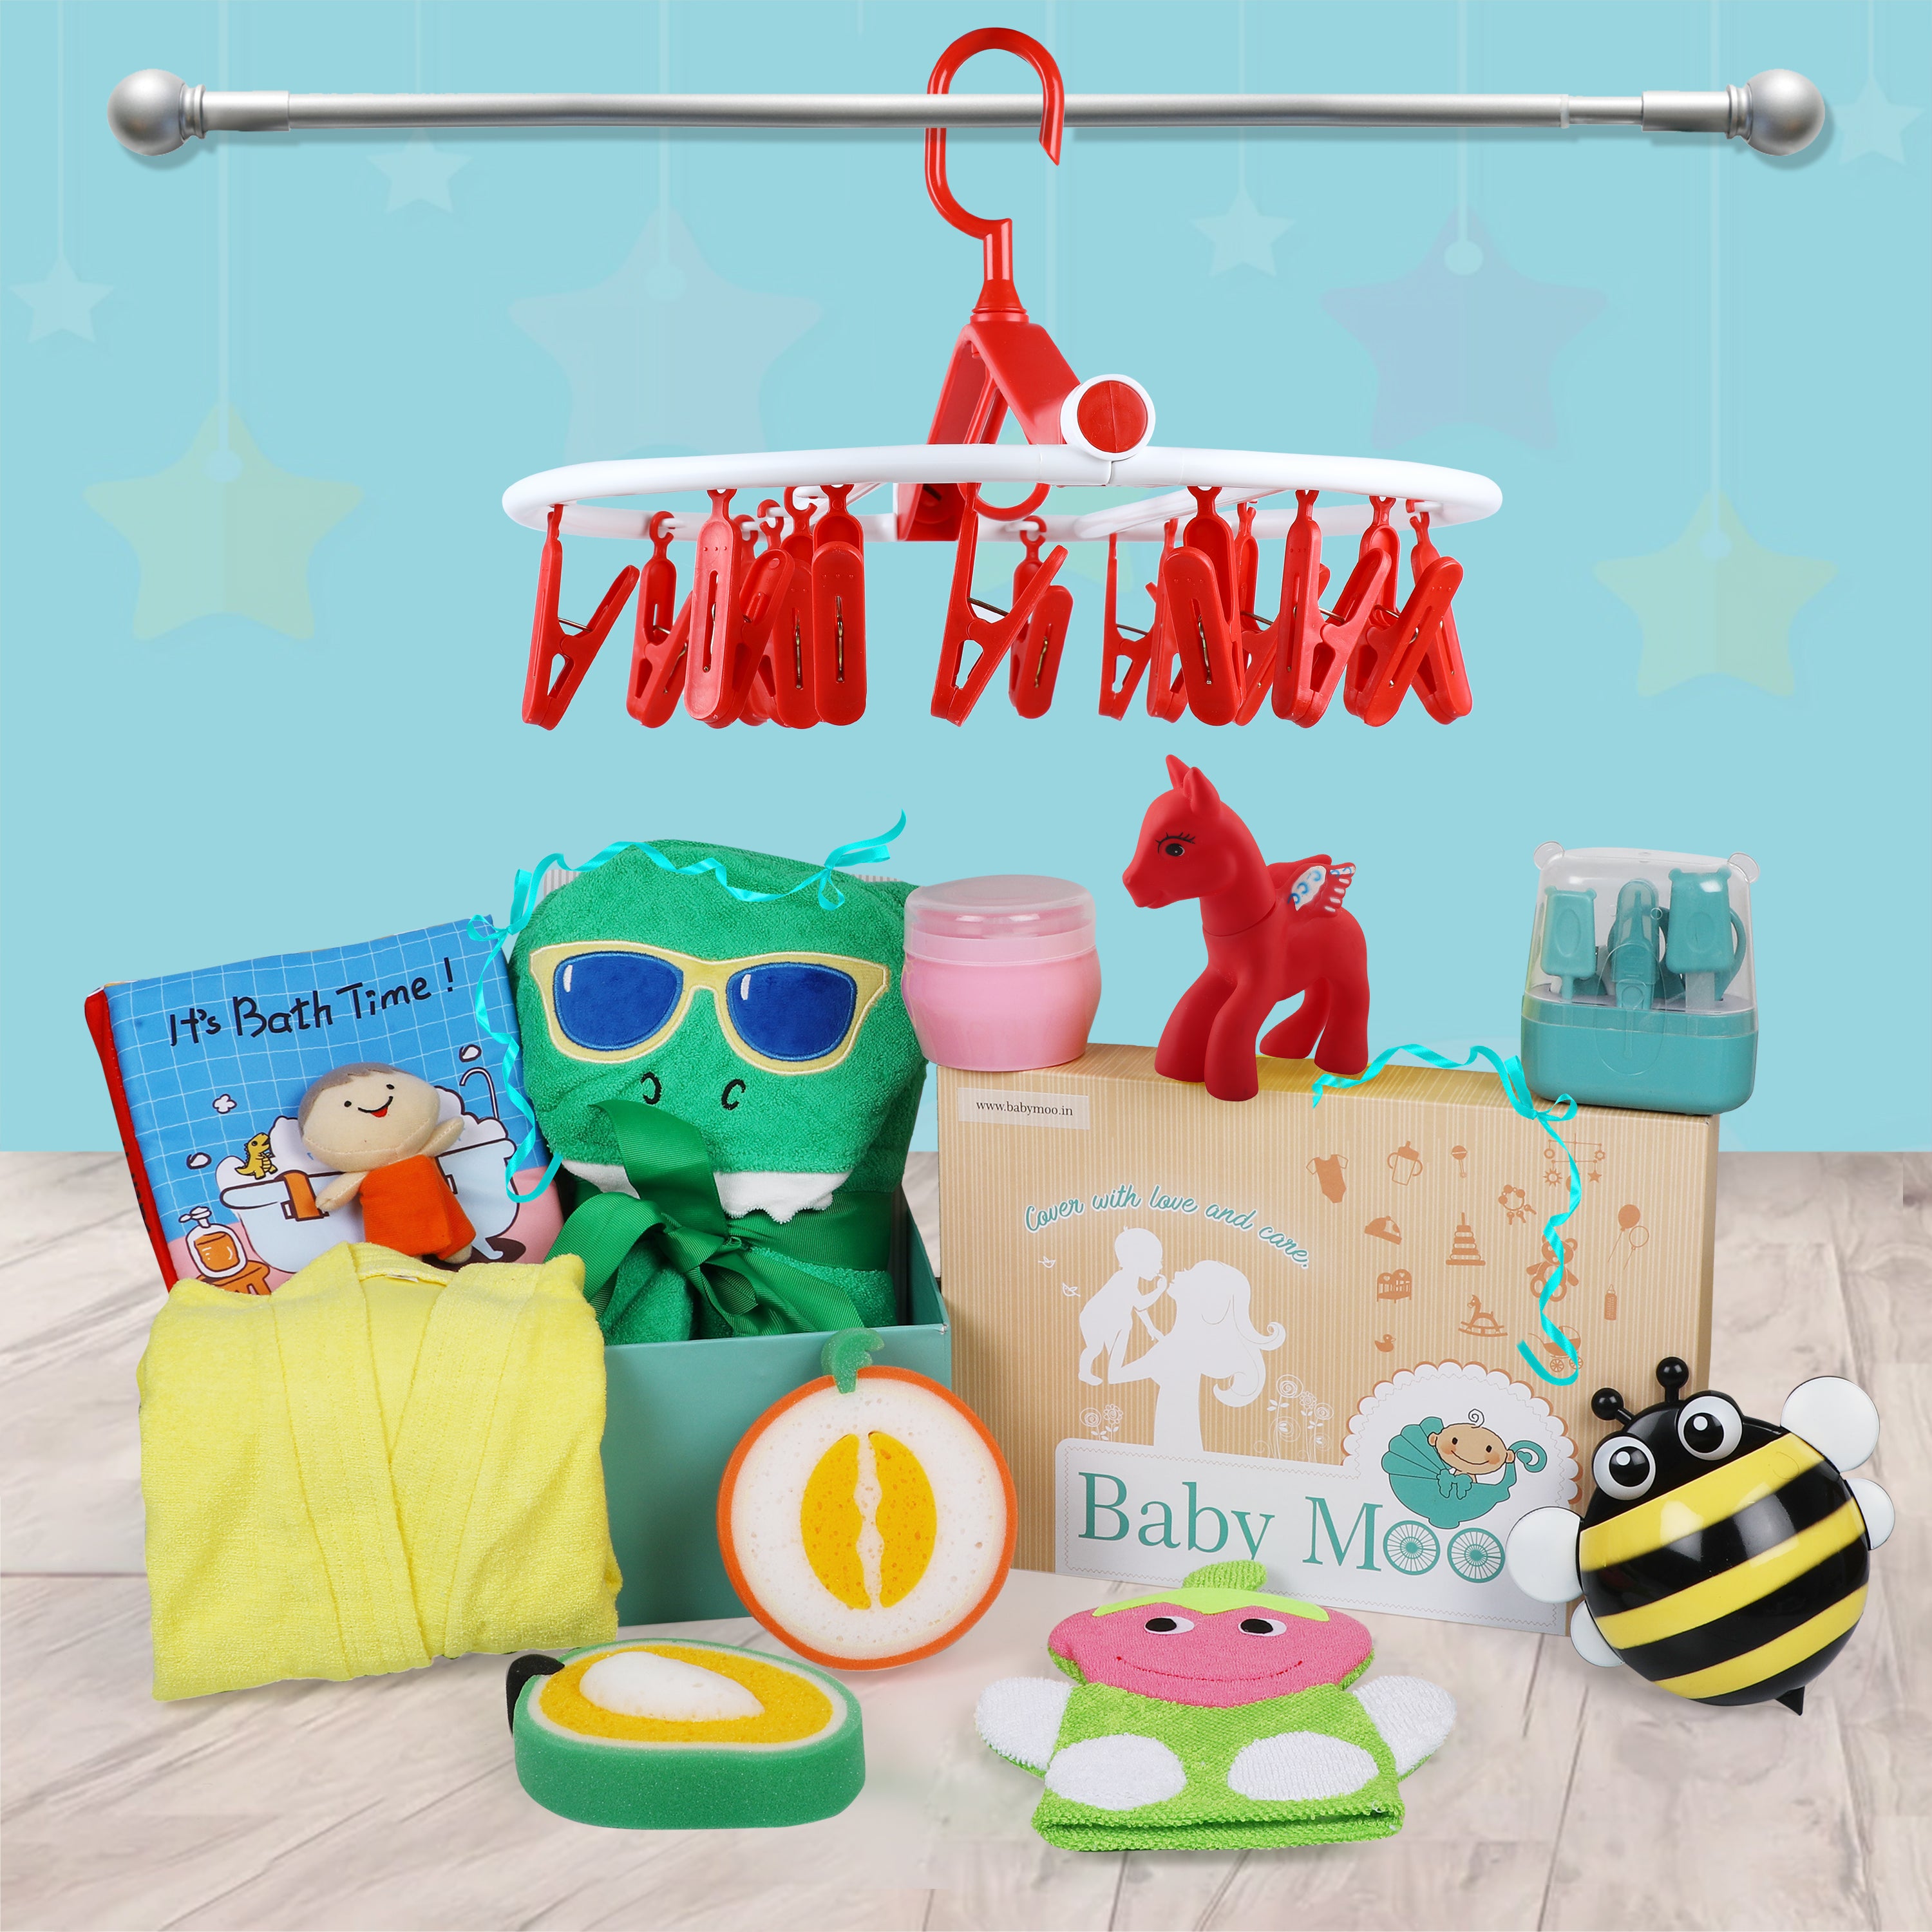 Baby Gifts | Target - Perfect Presents for Little Ones